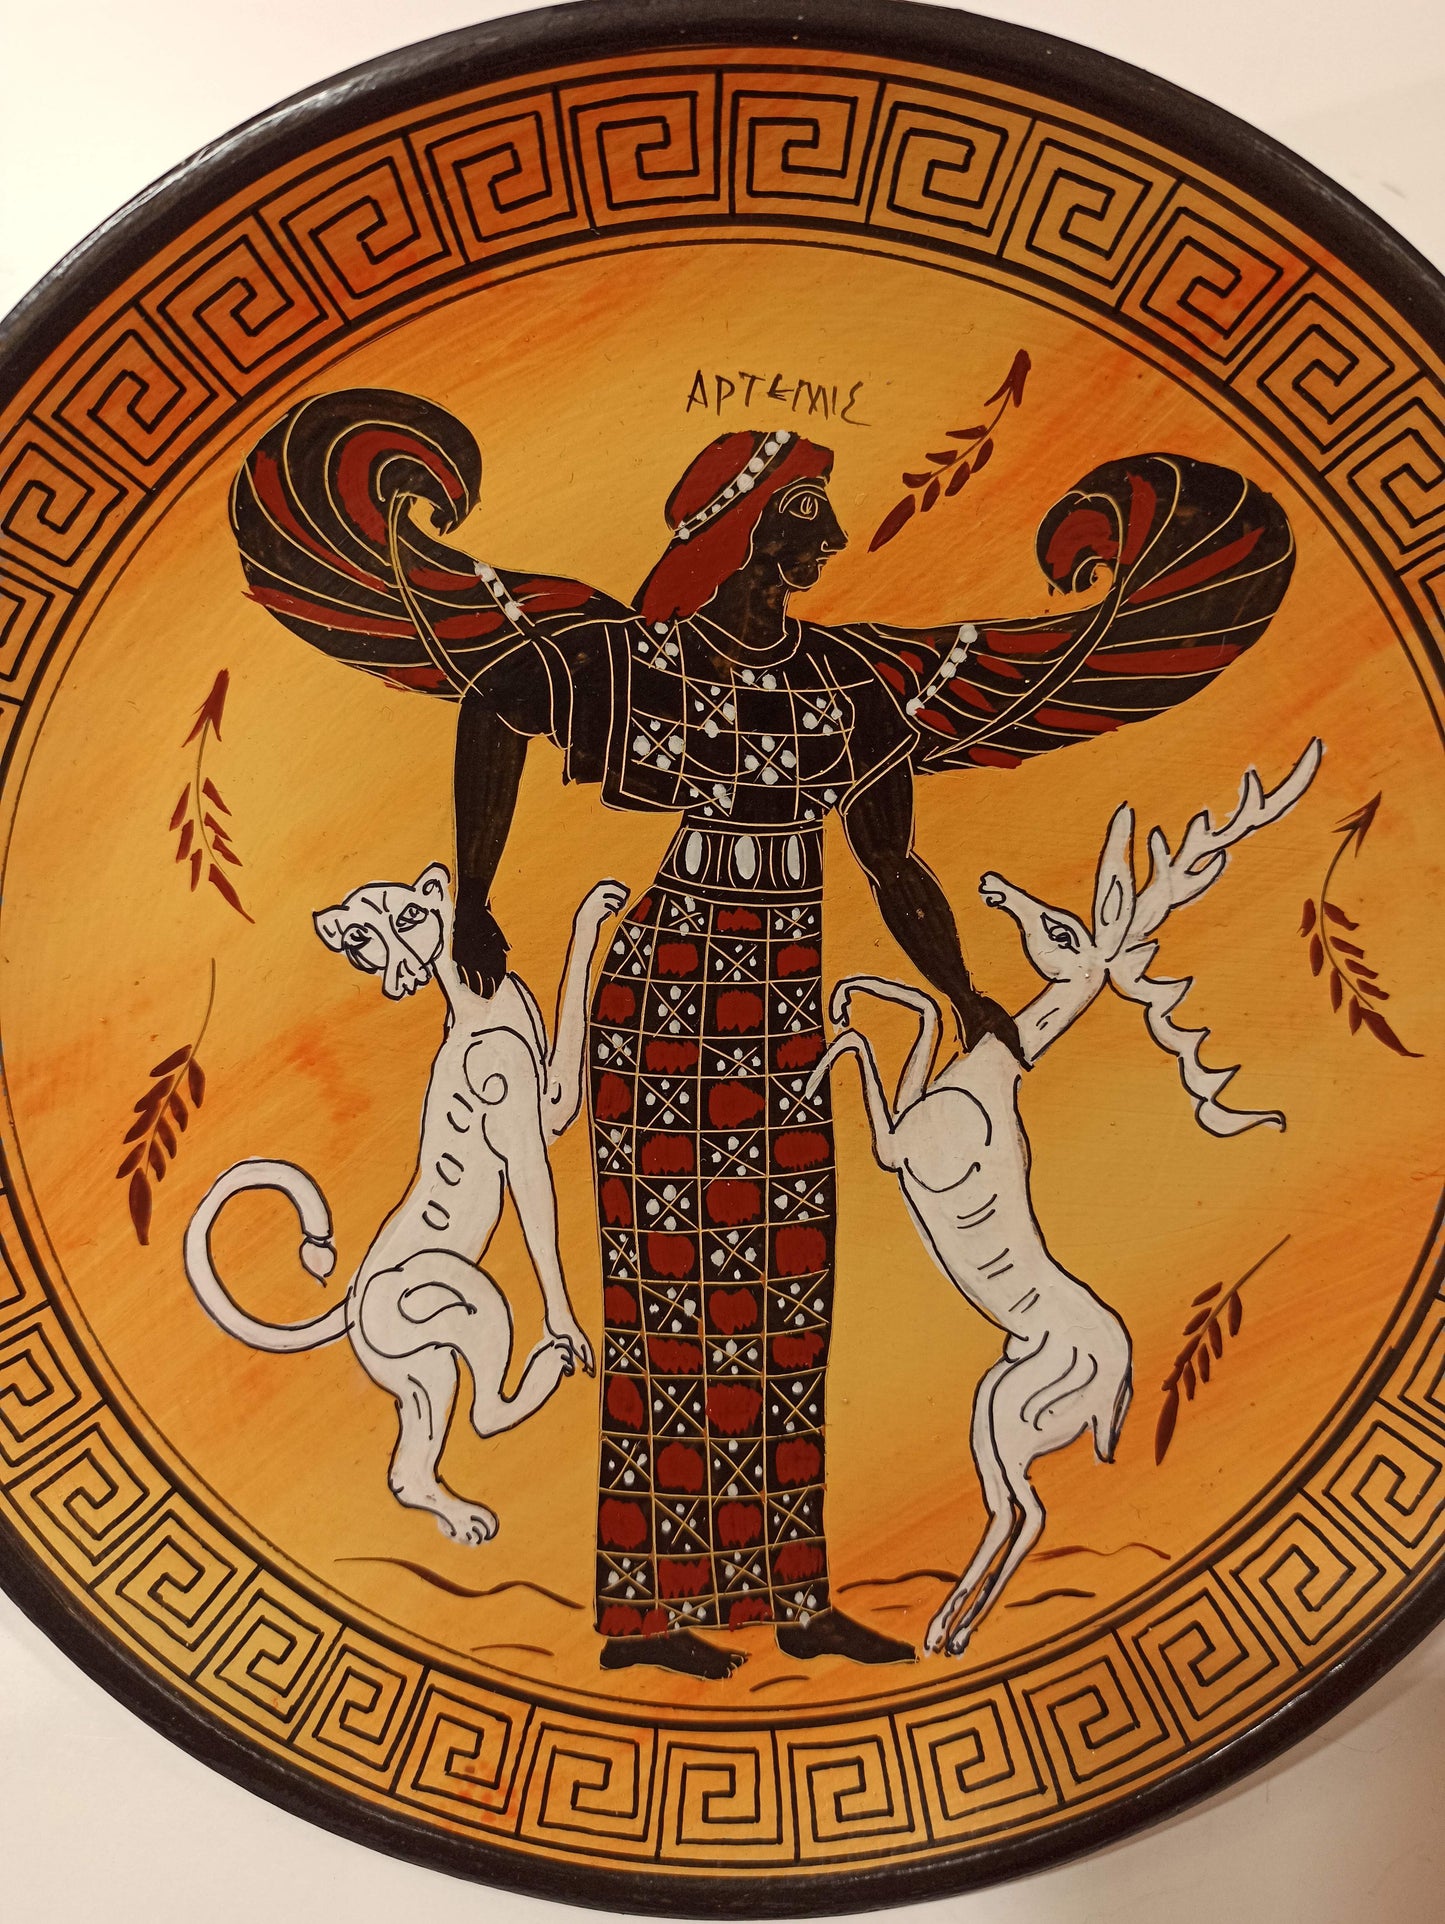 Artemis Diana - Greek Roman Goddess of Hunt, the Wilderness, Wild animals, the Moon and Chastity - Ceramic plate - Handmade in Greece